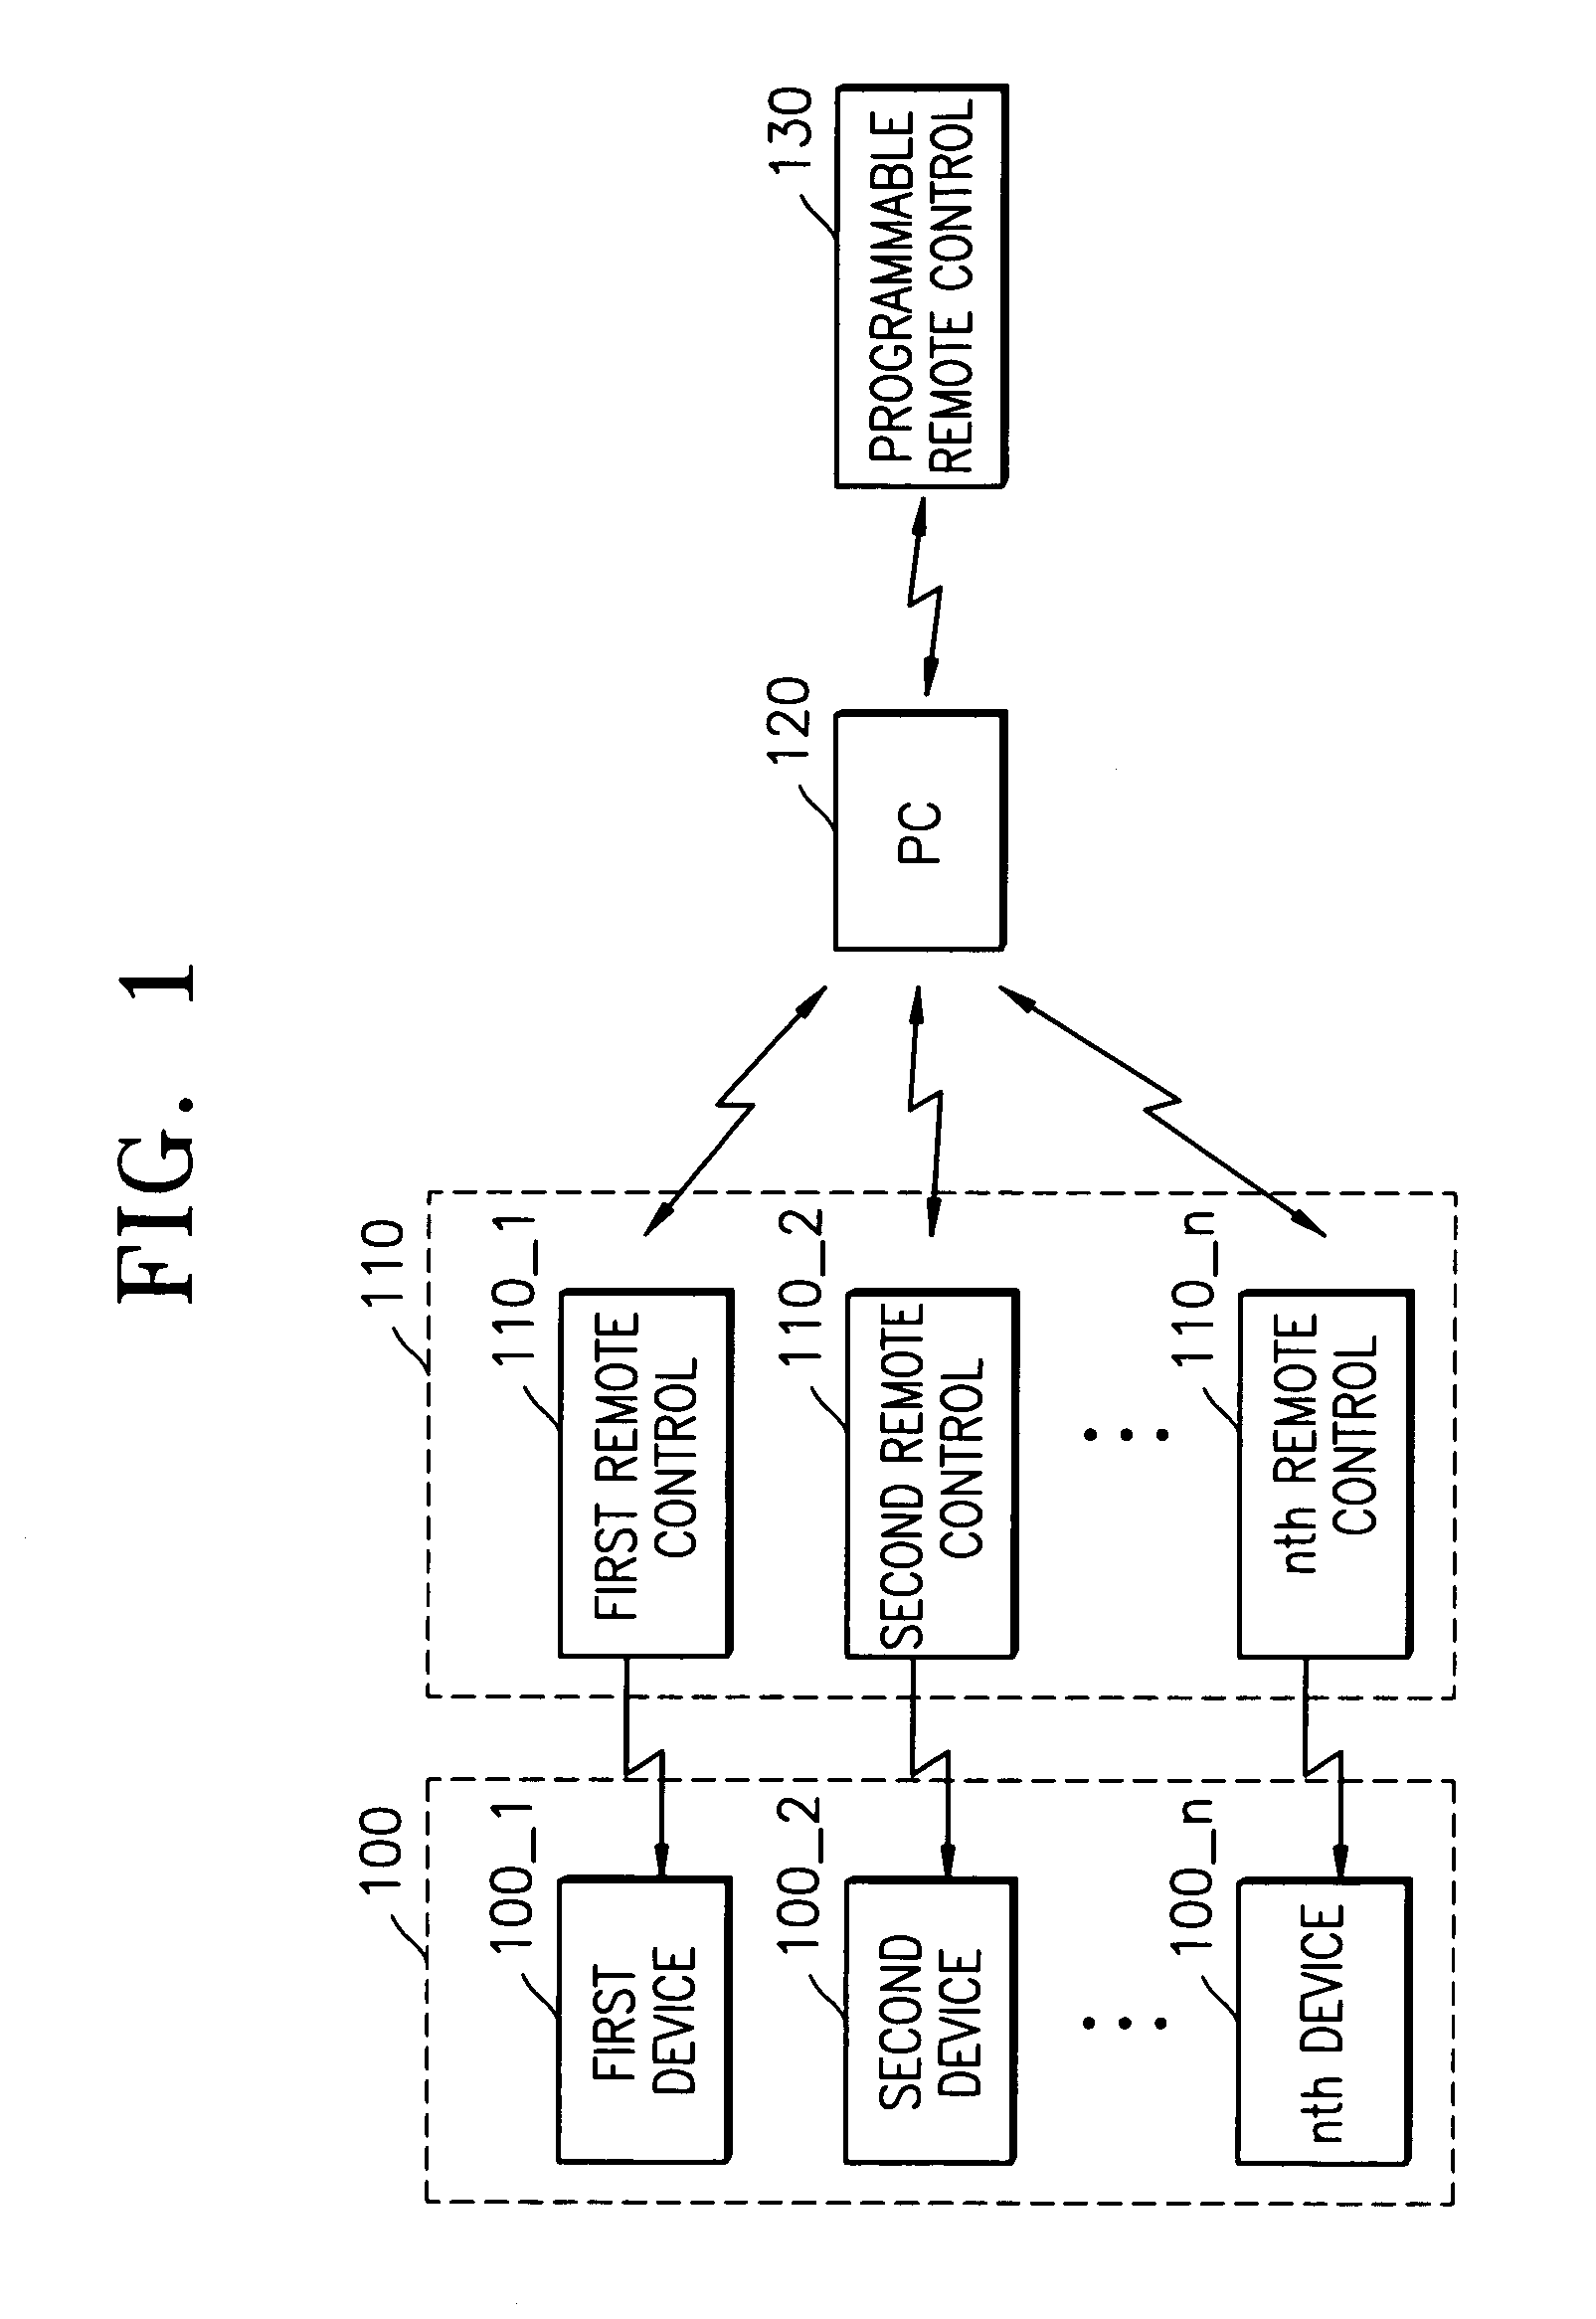 Apparatus and method for setting macro of remote control